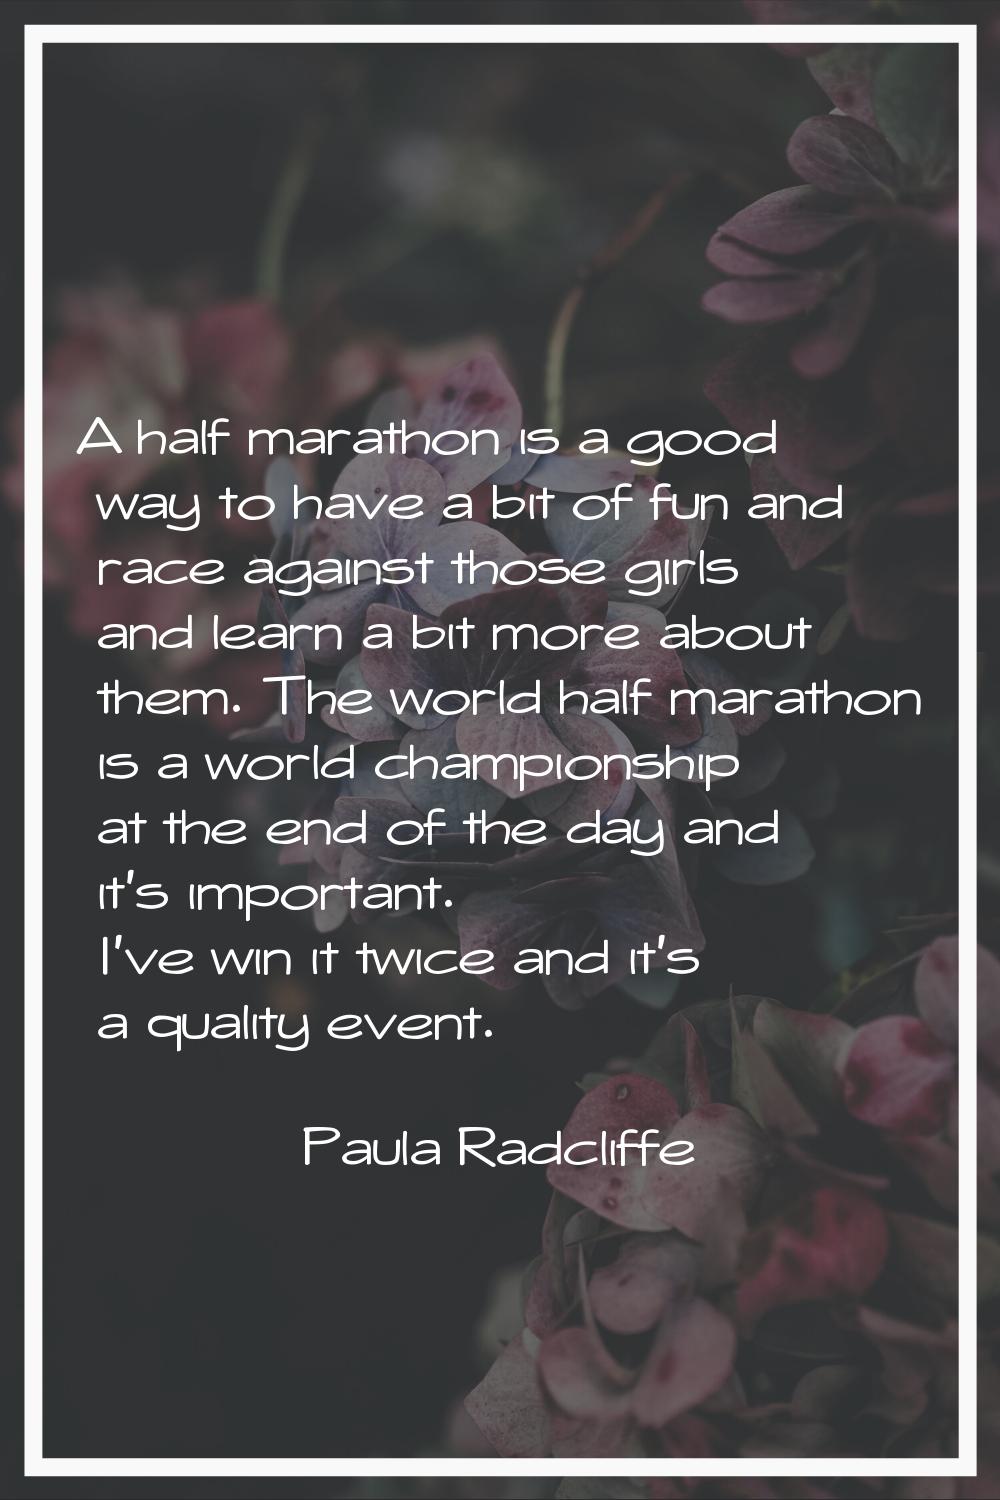 A half marathon is a good way to have a bit of fun and race against those girls and learn a bit mor